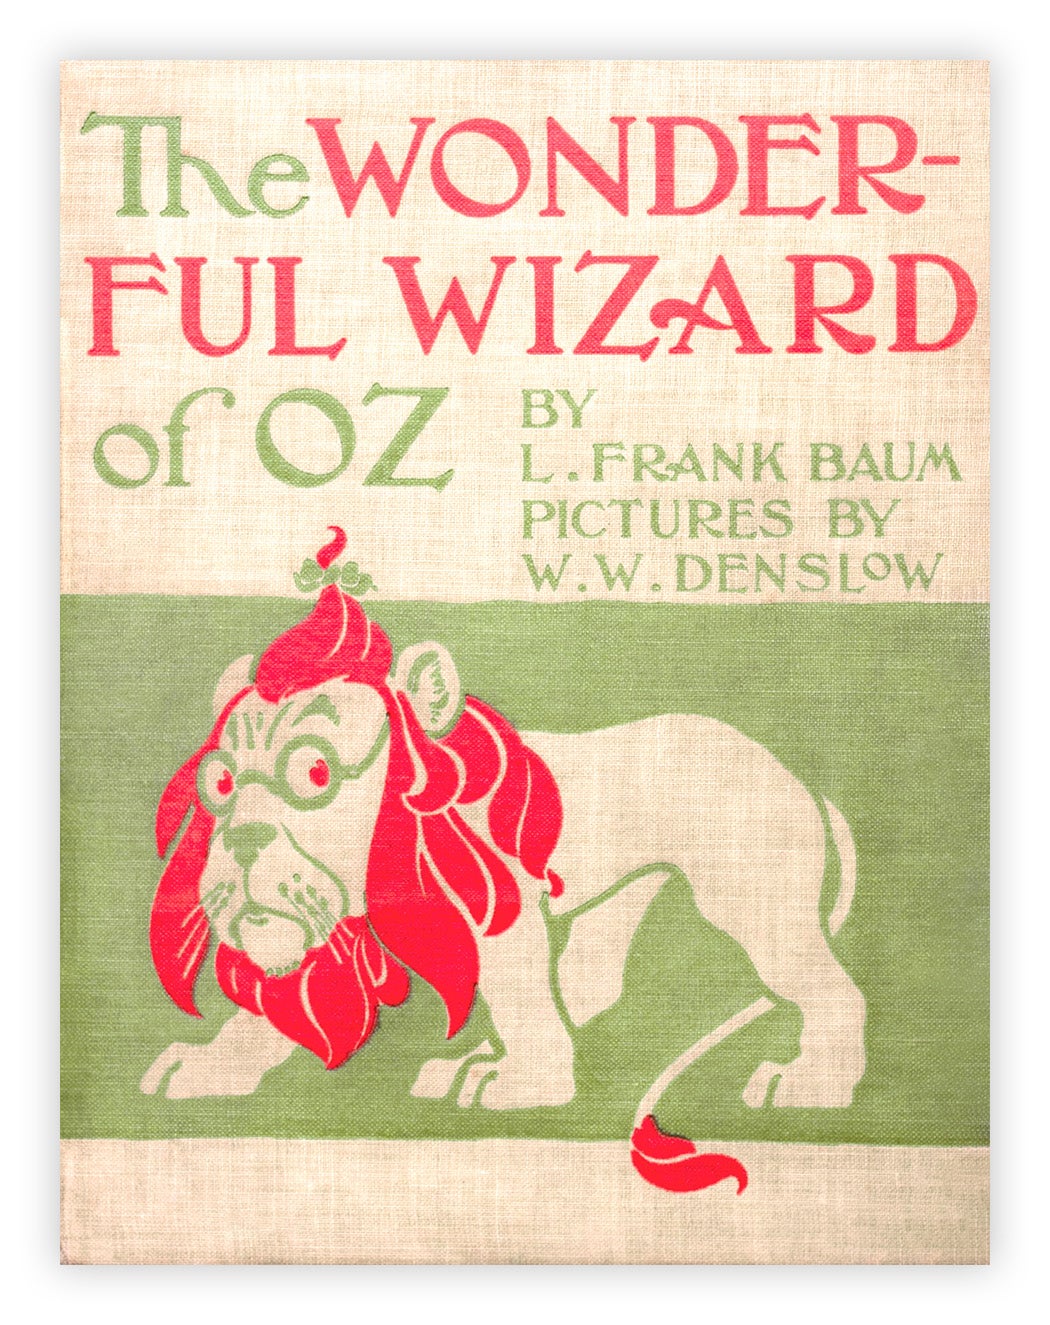 The first edition cover of The Wonderful Wizard of Oz